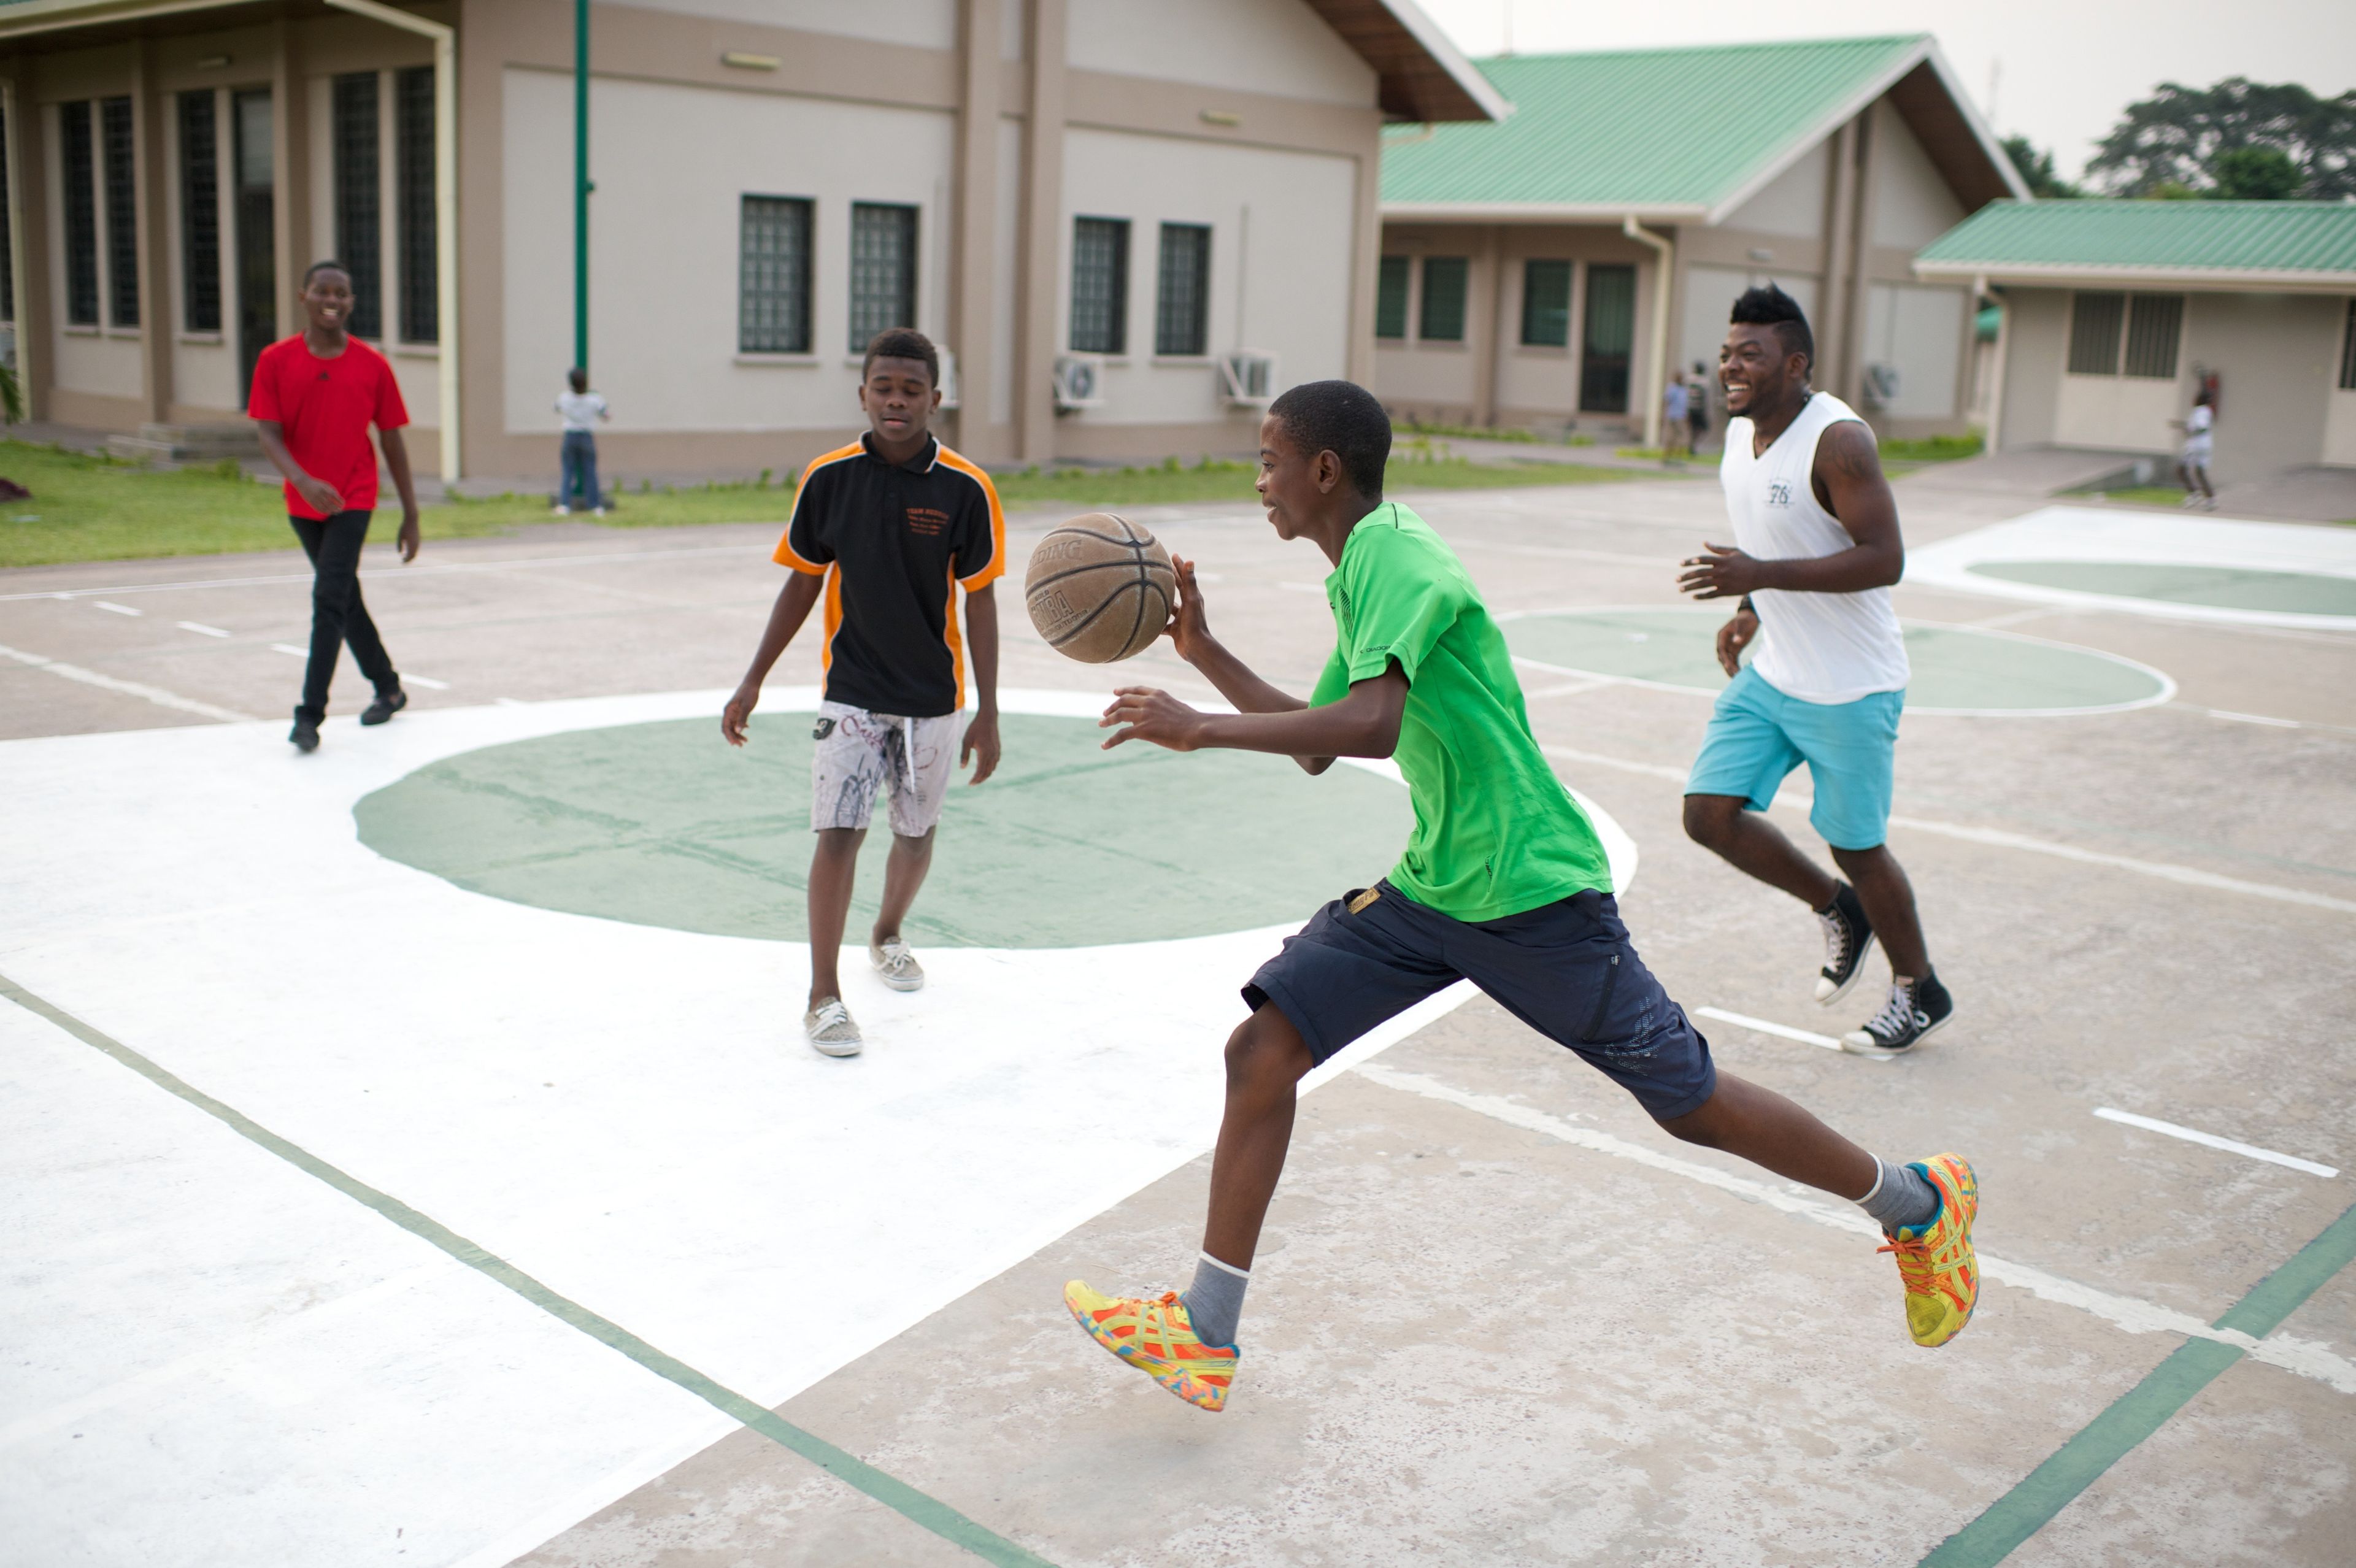 A young man from Africa quickly runs and dribbles a basketball with other players nearby.